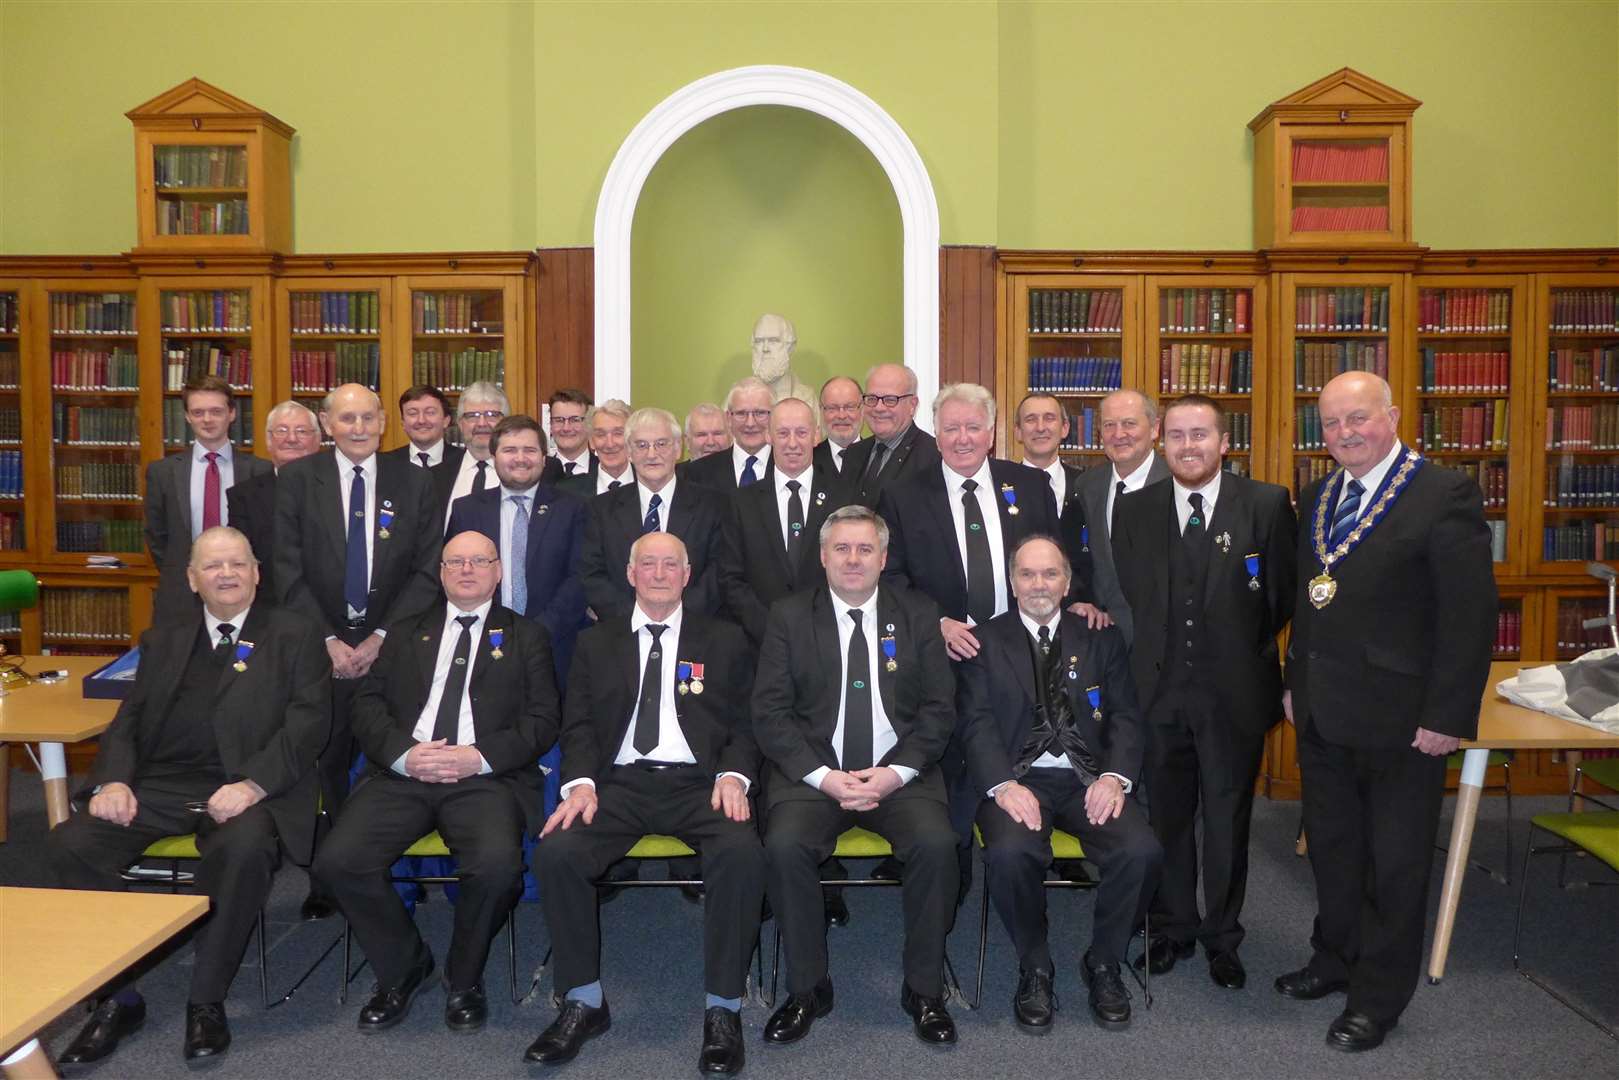 Caithness civic leader Willie Mackay (front, right) and some other local Highland councillors with Freemasons from St Peter’s Operative Lodge 284 Thurso who attended the civic reception. Picture: Willie Mackay